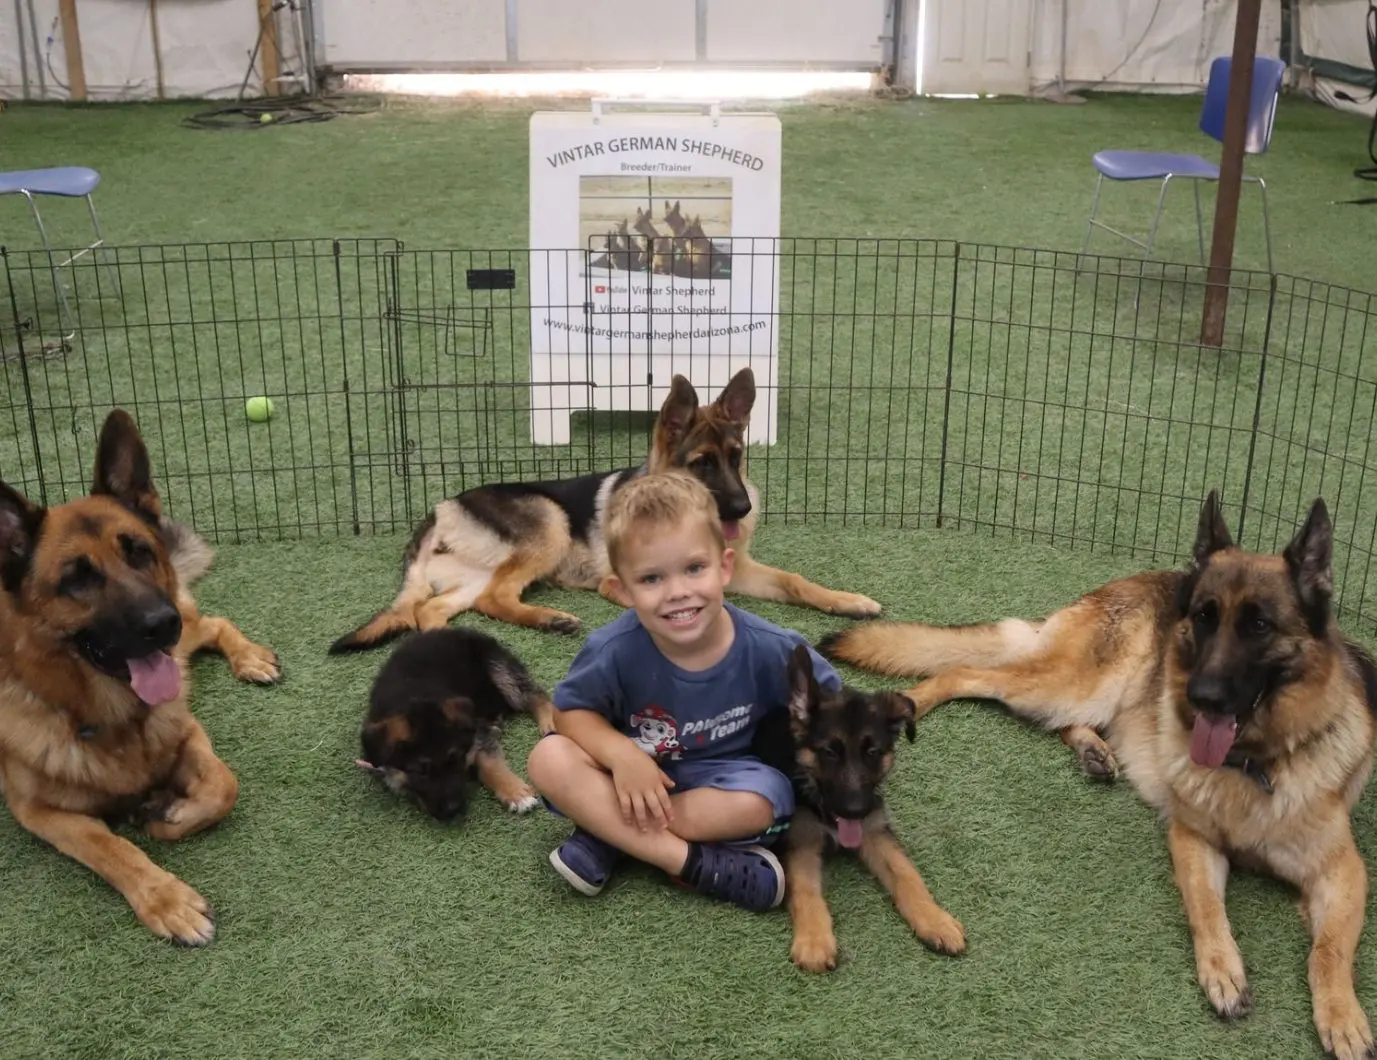 A boy sitting on the ground with several dogs.